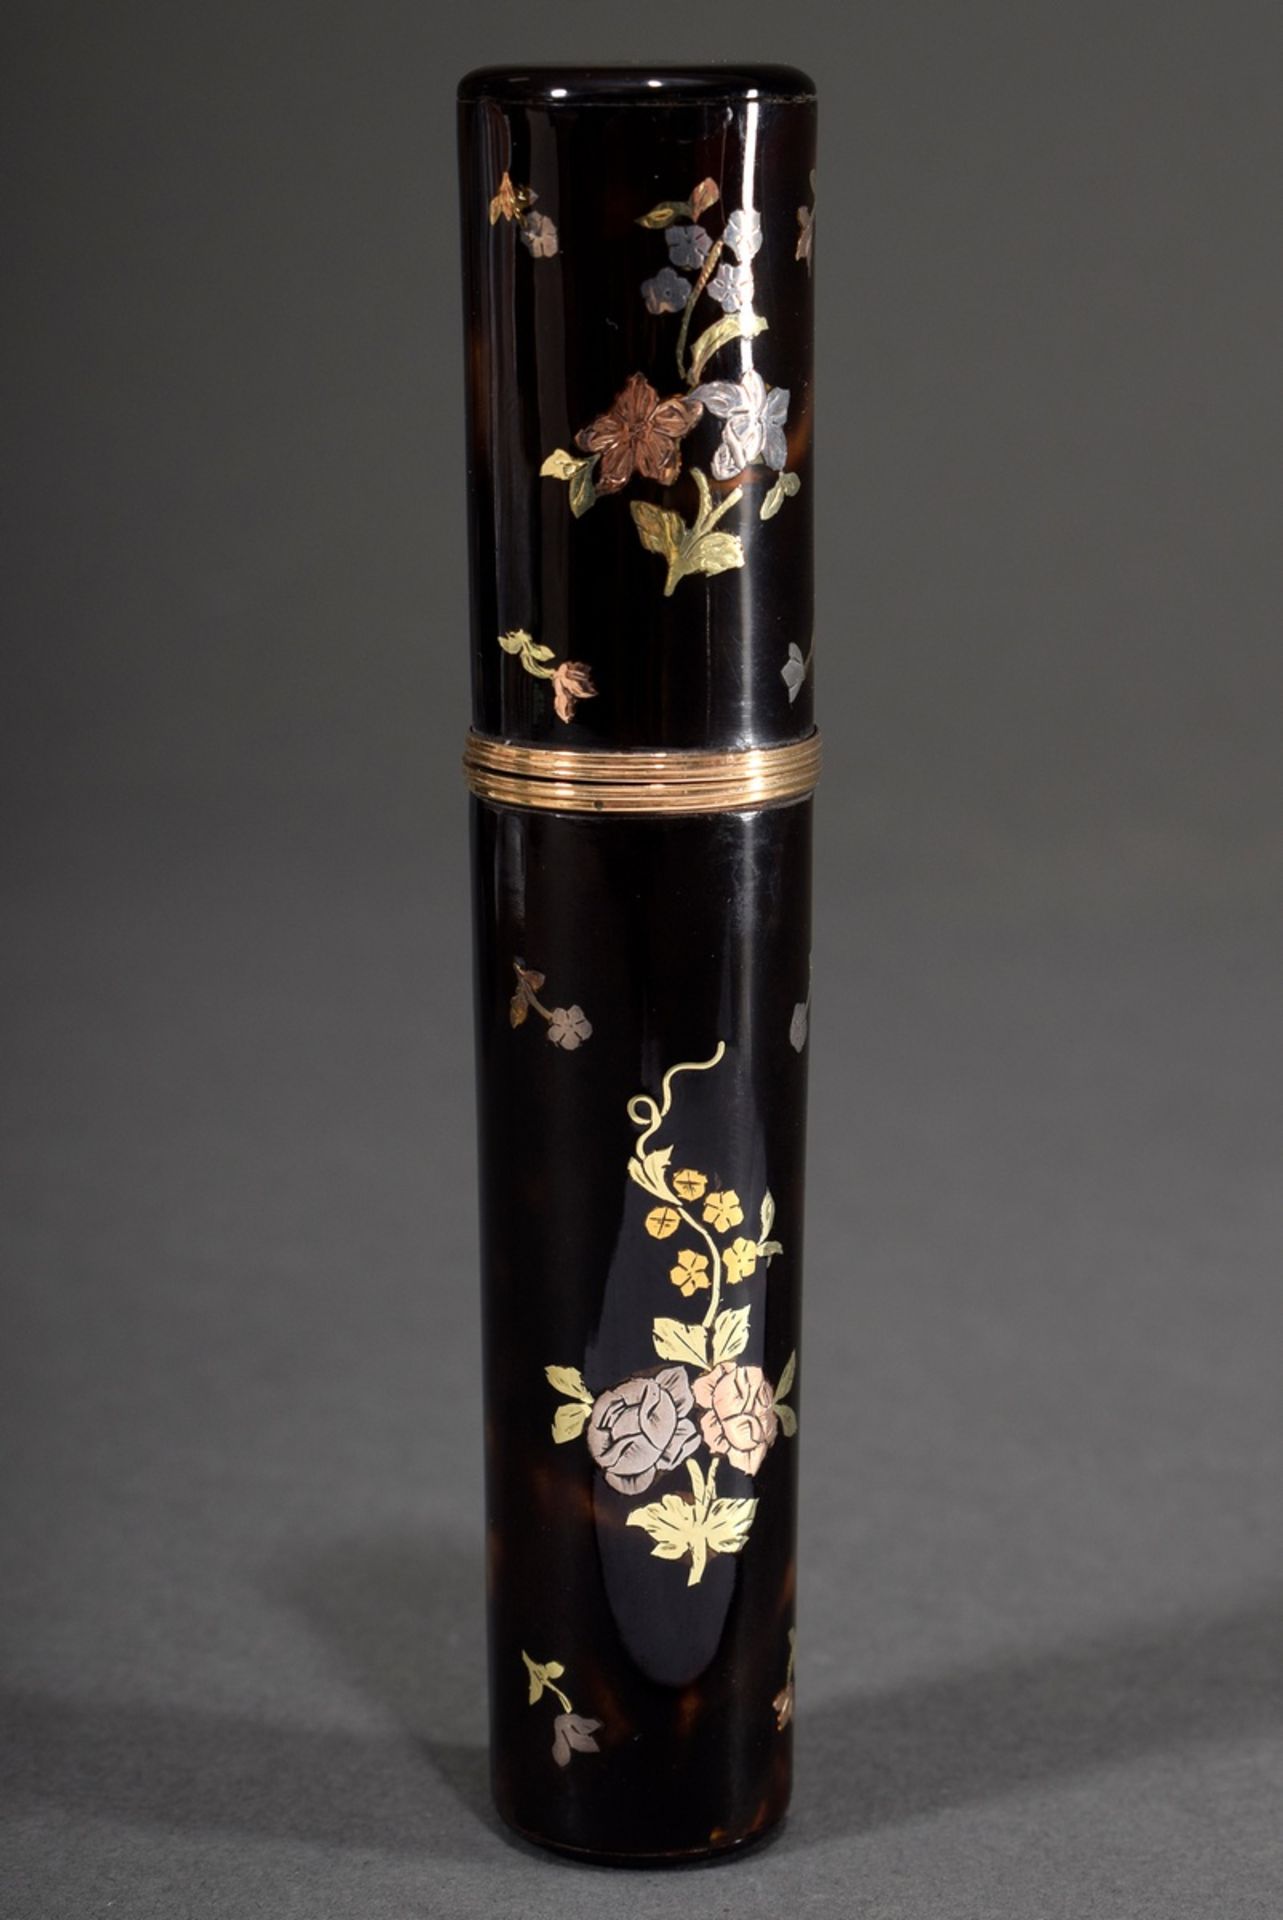 Slender cylindrical tortoiseshell needle case with RG/GG and silver piqué-posé inlays "flower tendr